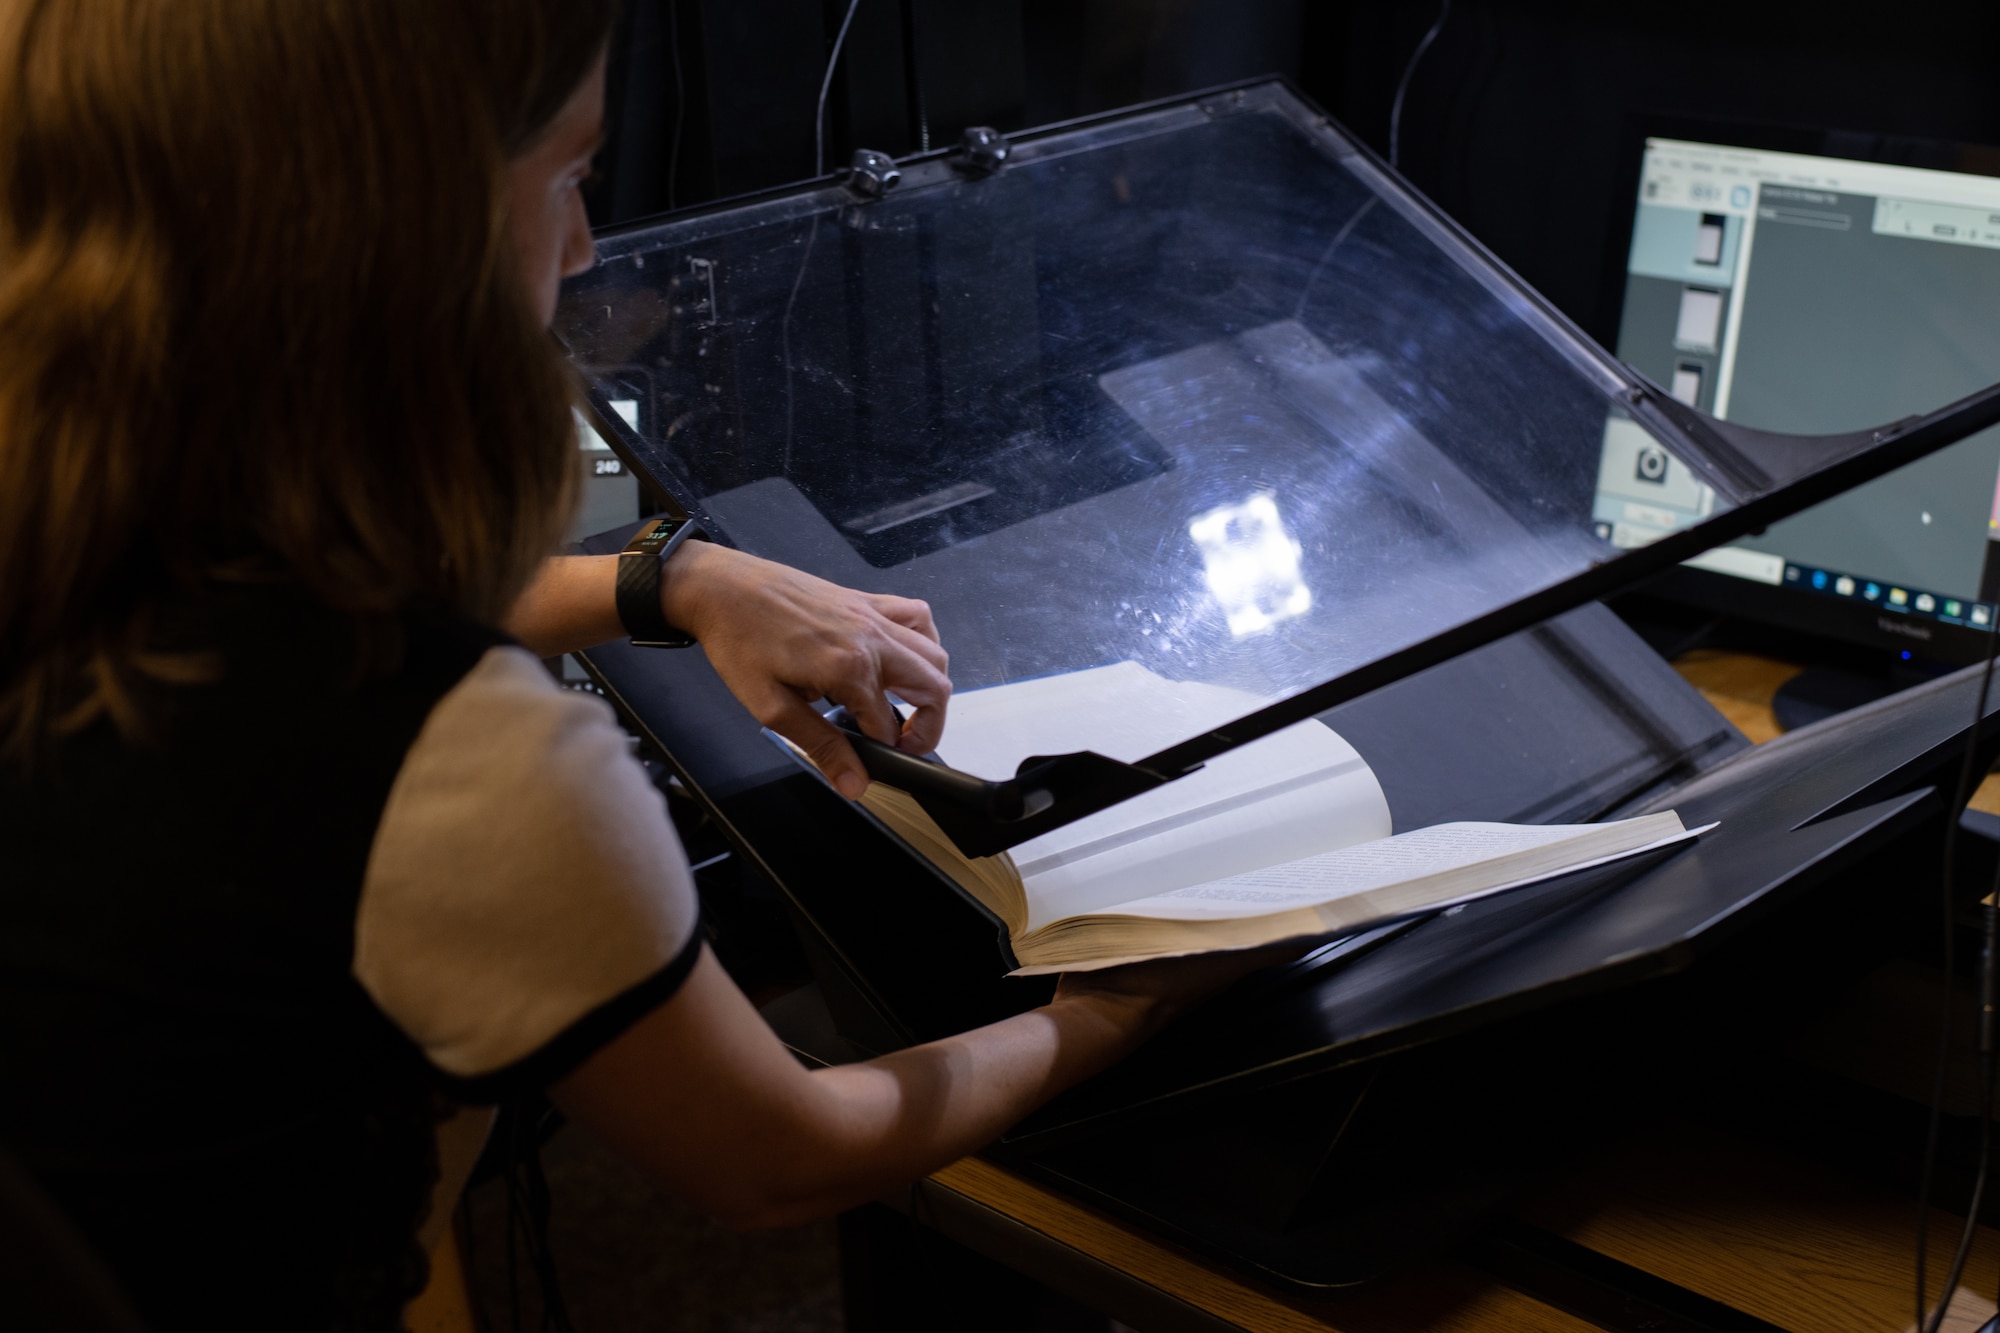 Alexandra Aldridge, Air University Library employee, demonstrates one of the digitization methods the library is using to make their resources available DOD-wide, Aug. 22, 2019, on Maxwell Air Force Base, Alabama. The AUL is currently working on digitizing more than 2,500 linear feet of resources, providing the larger Air Force and DOD communities with access to their research and products regardless of location.